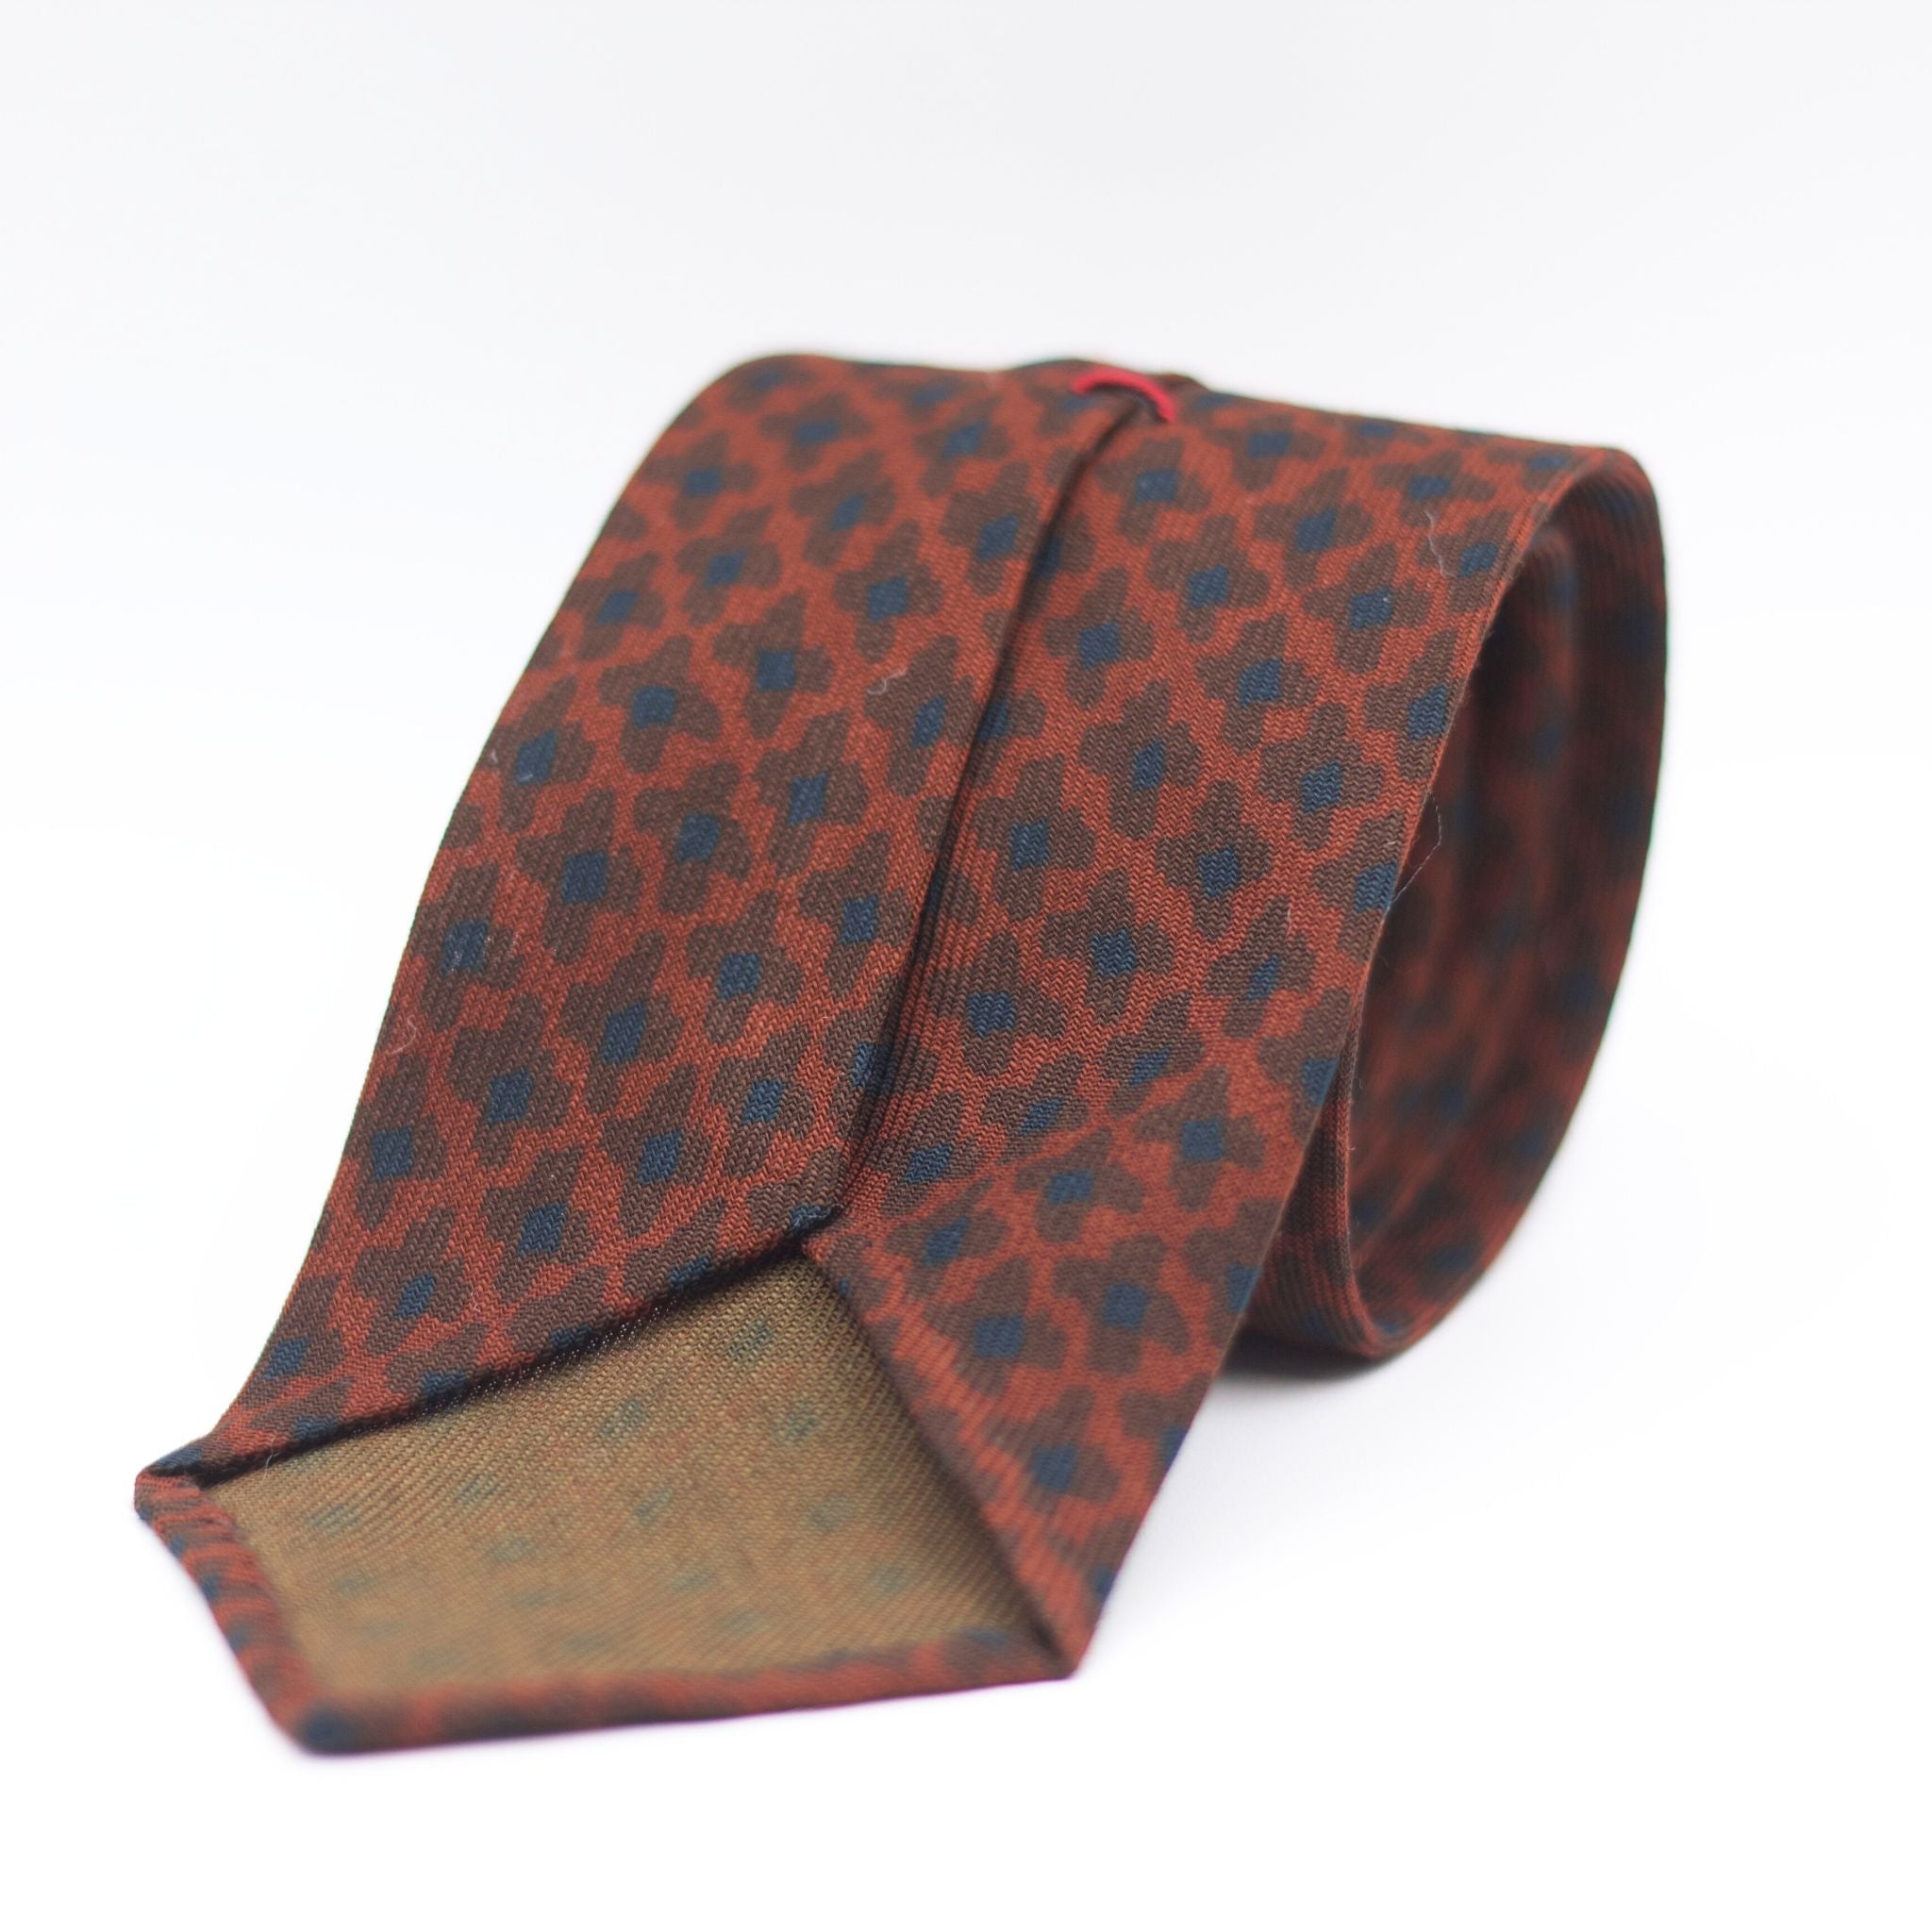 Cruciani & Bella 100%  Printed Wool  Unlined Hand rolled blades Light Brown, Brown and Blue  Motifs Tie Handmade in Italy 8 cm x 150 cm